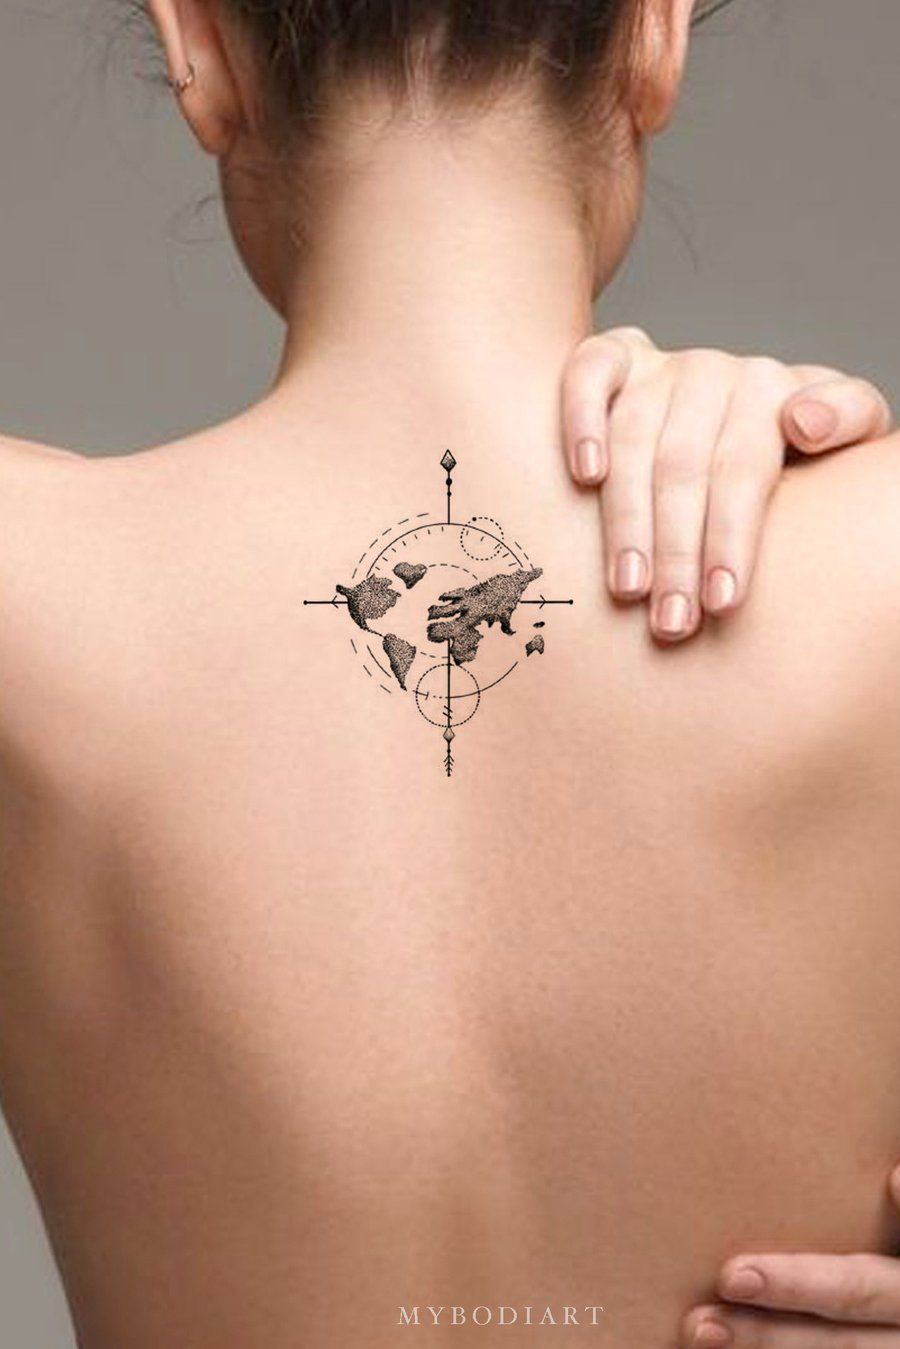 240+ Spiritual Tattoo Designs With Meanings (2021) Metaphysical Ideas